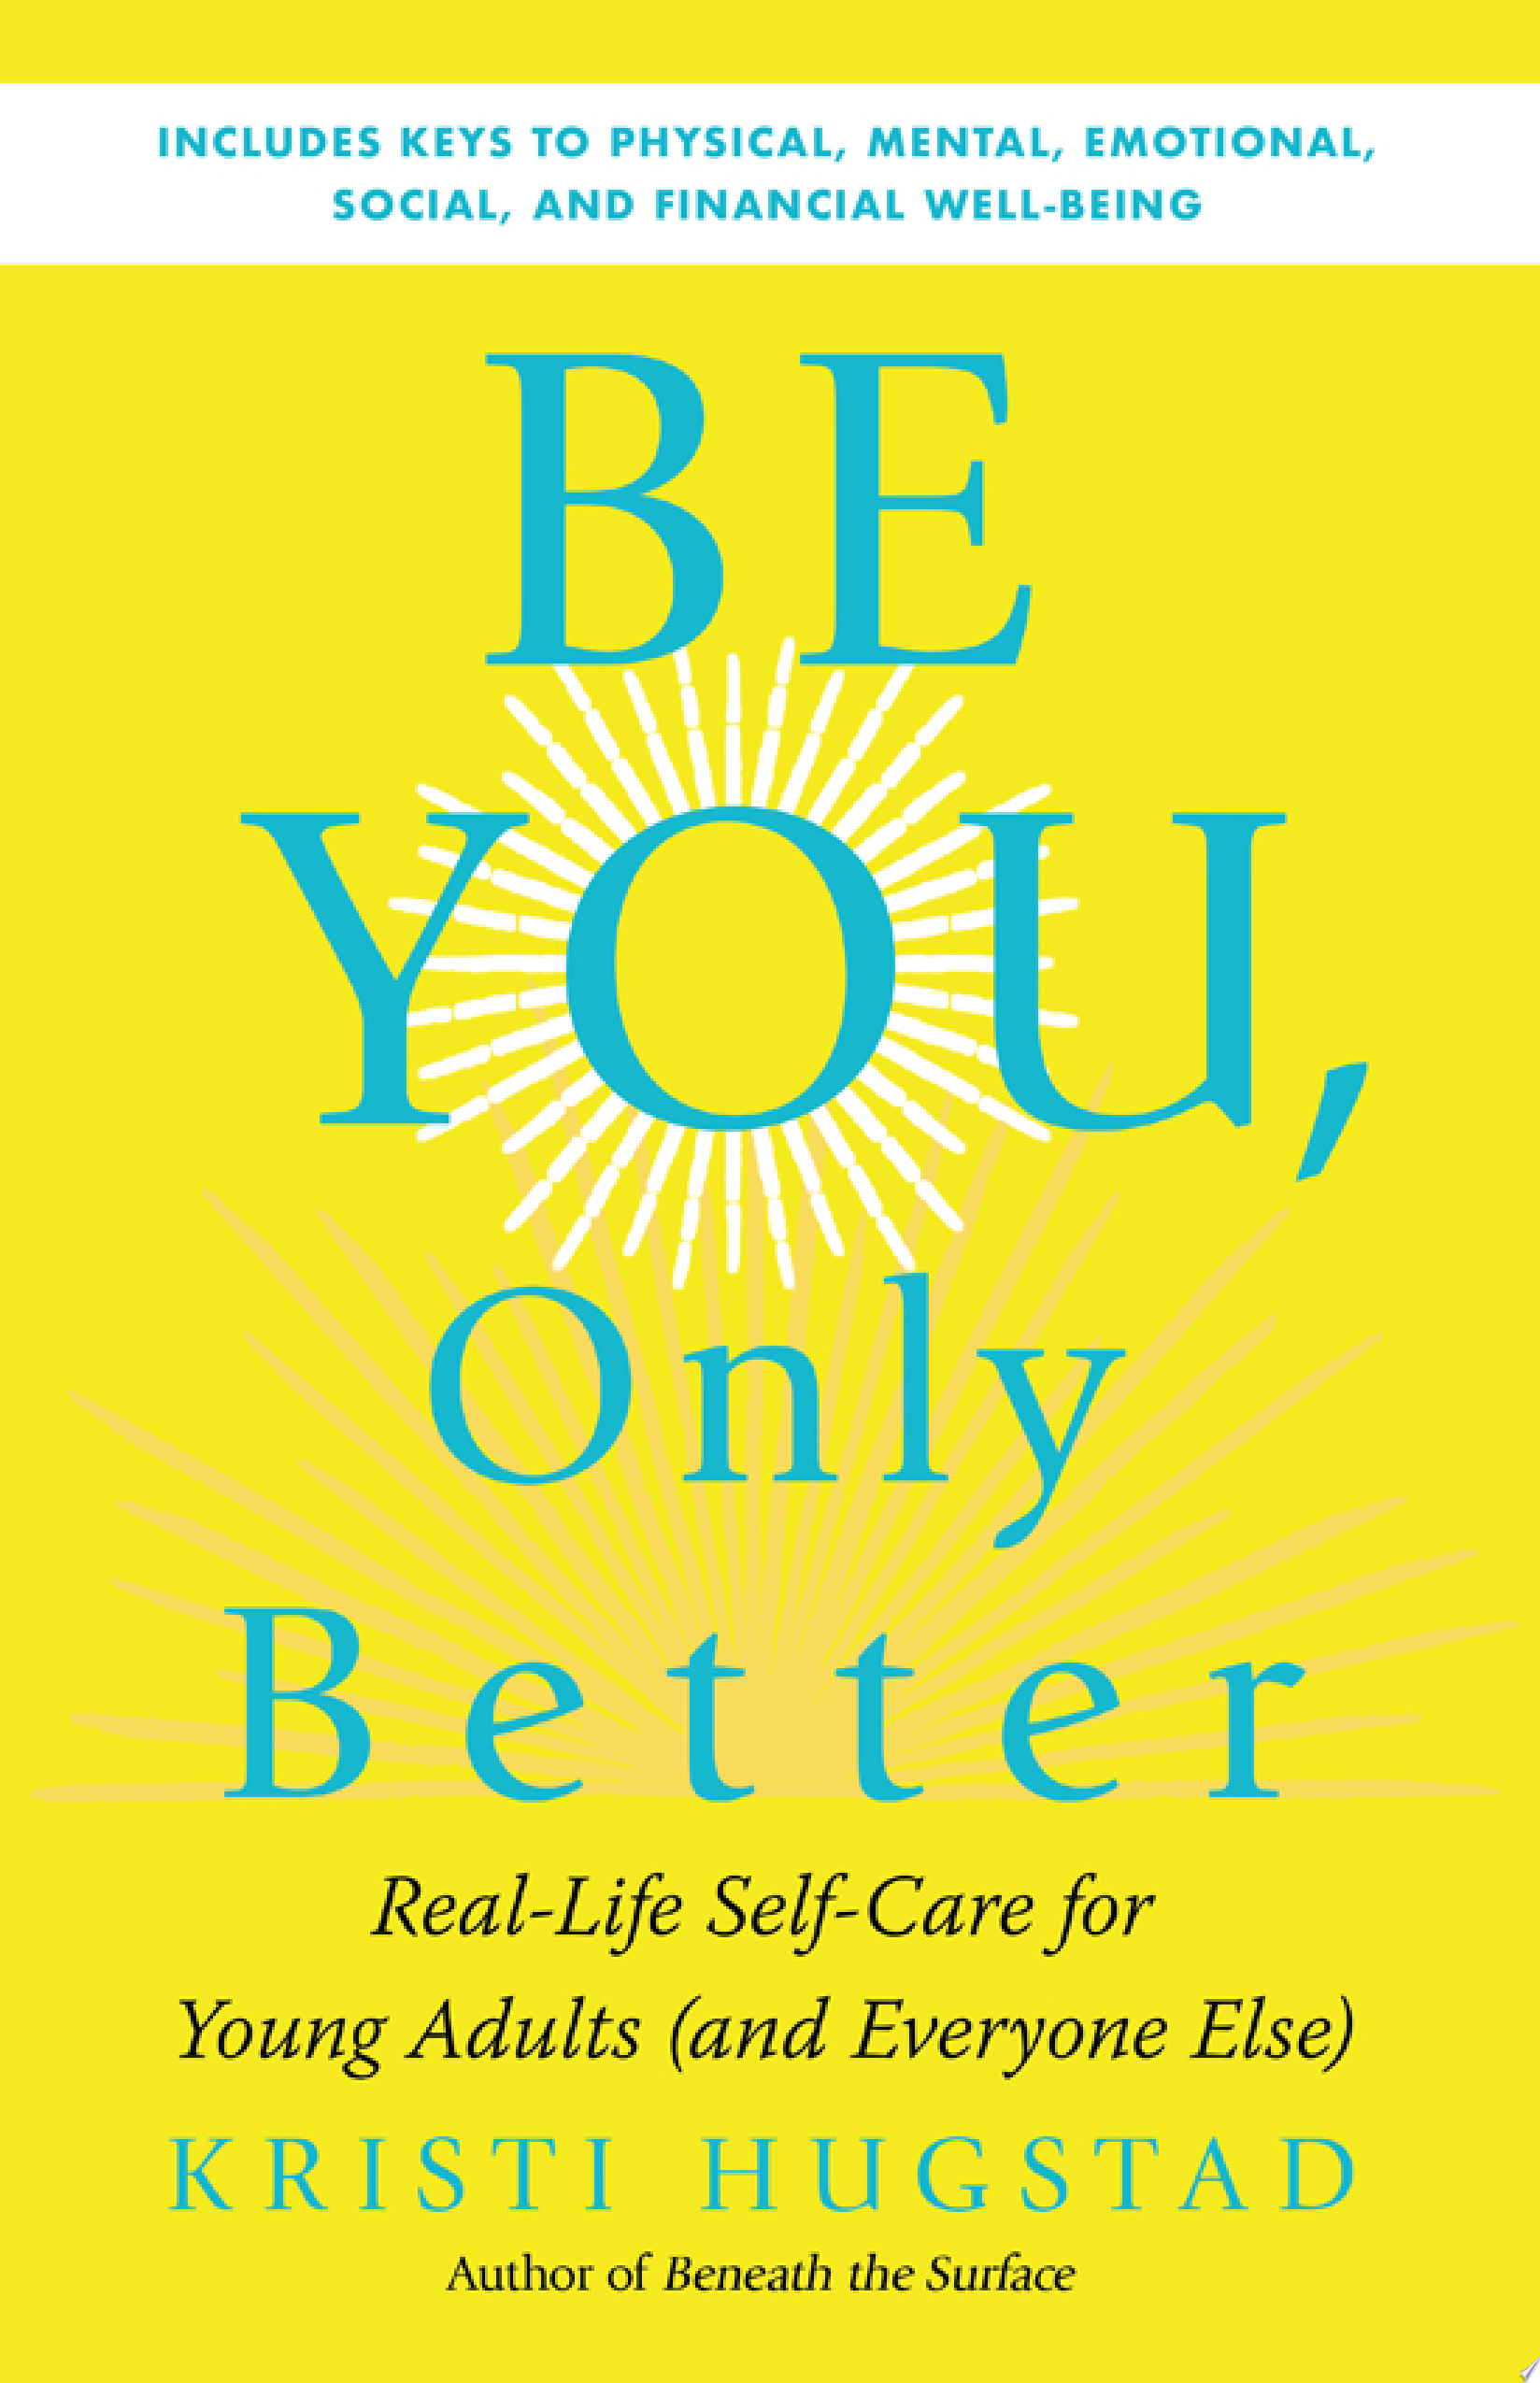 Image for "Be You, Only Better"